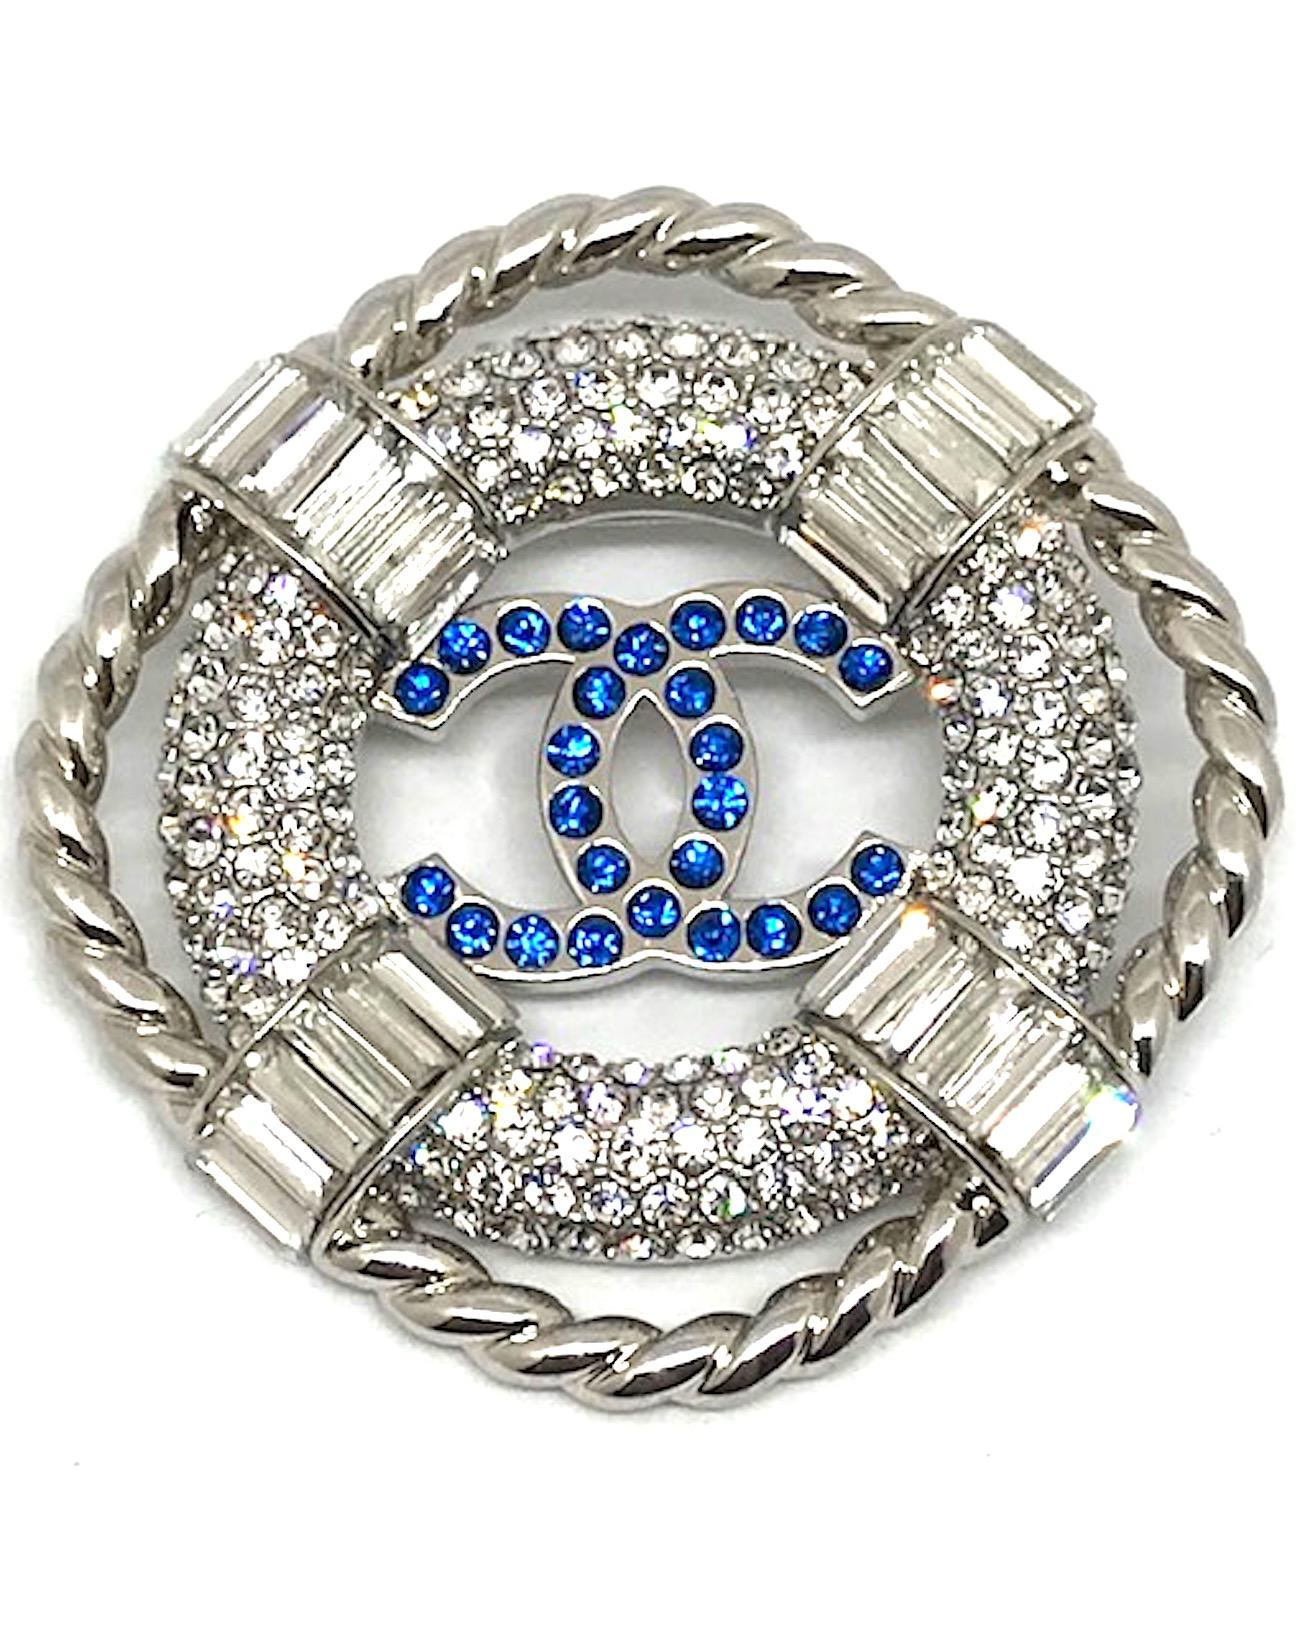 A lovely Chanel lifesaver nautical pin from the 2019 cruise collection. Rhodium plate set with pave' and baguette rhinestones. Blue rhinestone Chanel CC logo in the center of the lifesaver wheel and surrounded by a braided rope. On the back of the